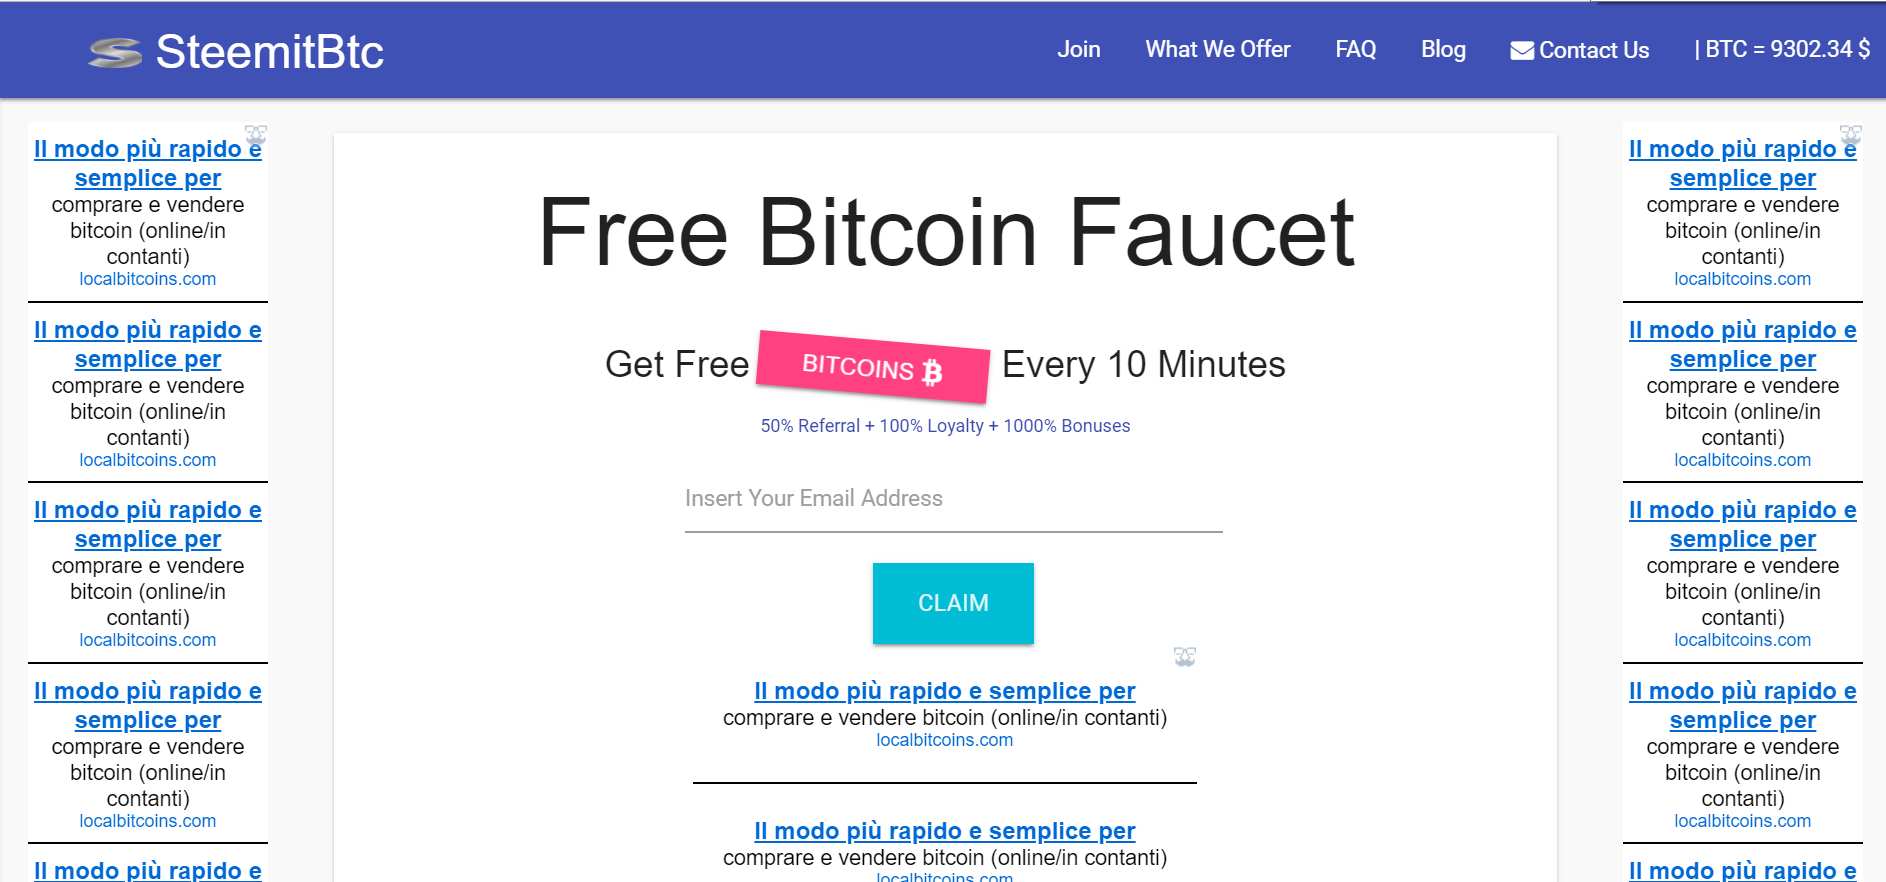 How to make money online e how to get free referrals with Steemitbtc